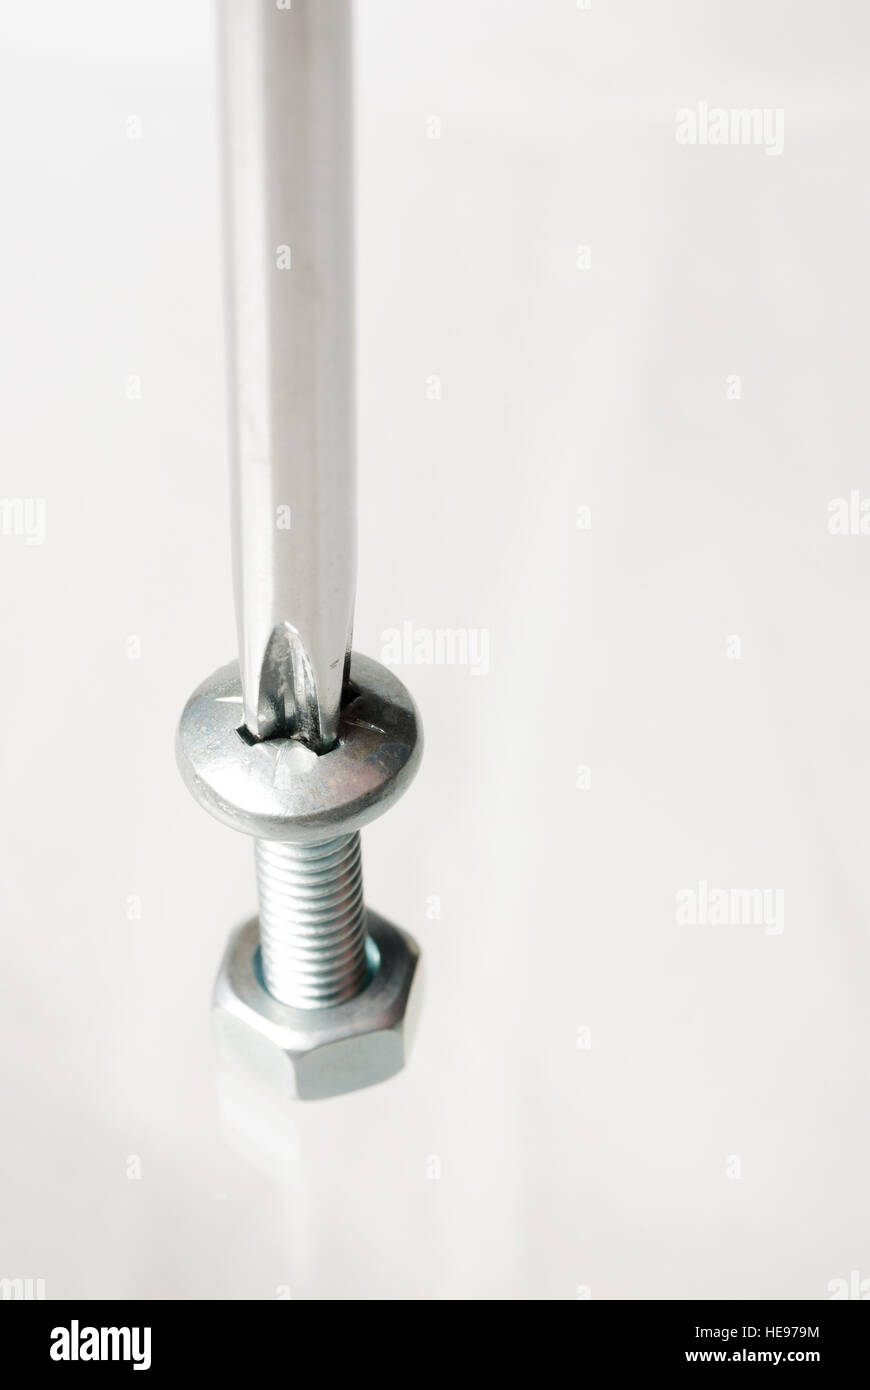 Screwdriver inserted into a bolt with a nut Stock Photo